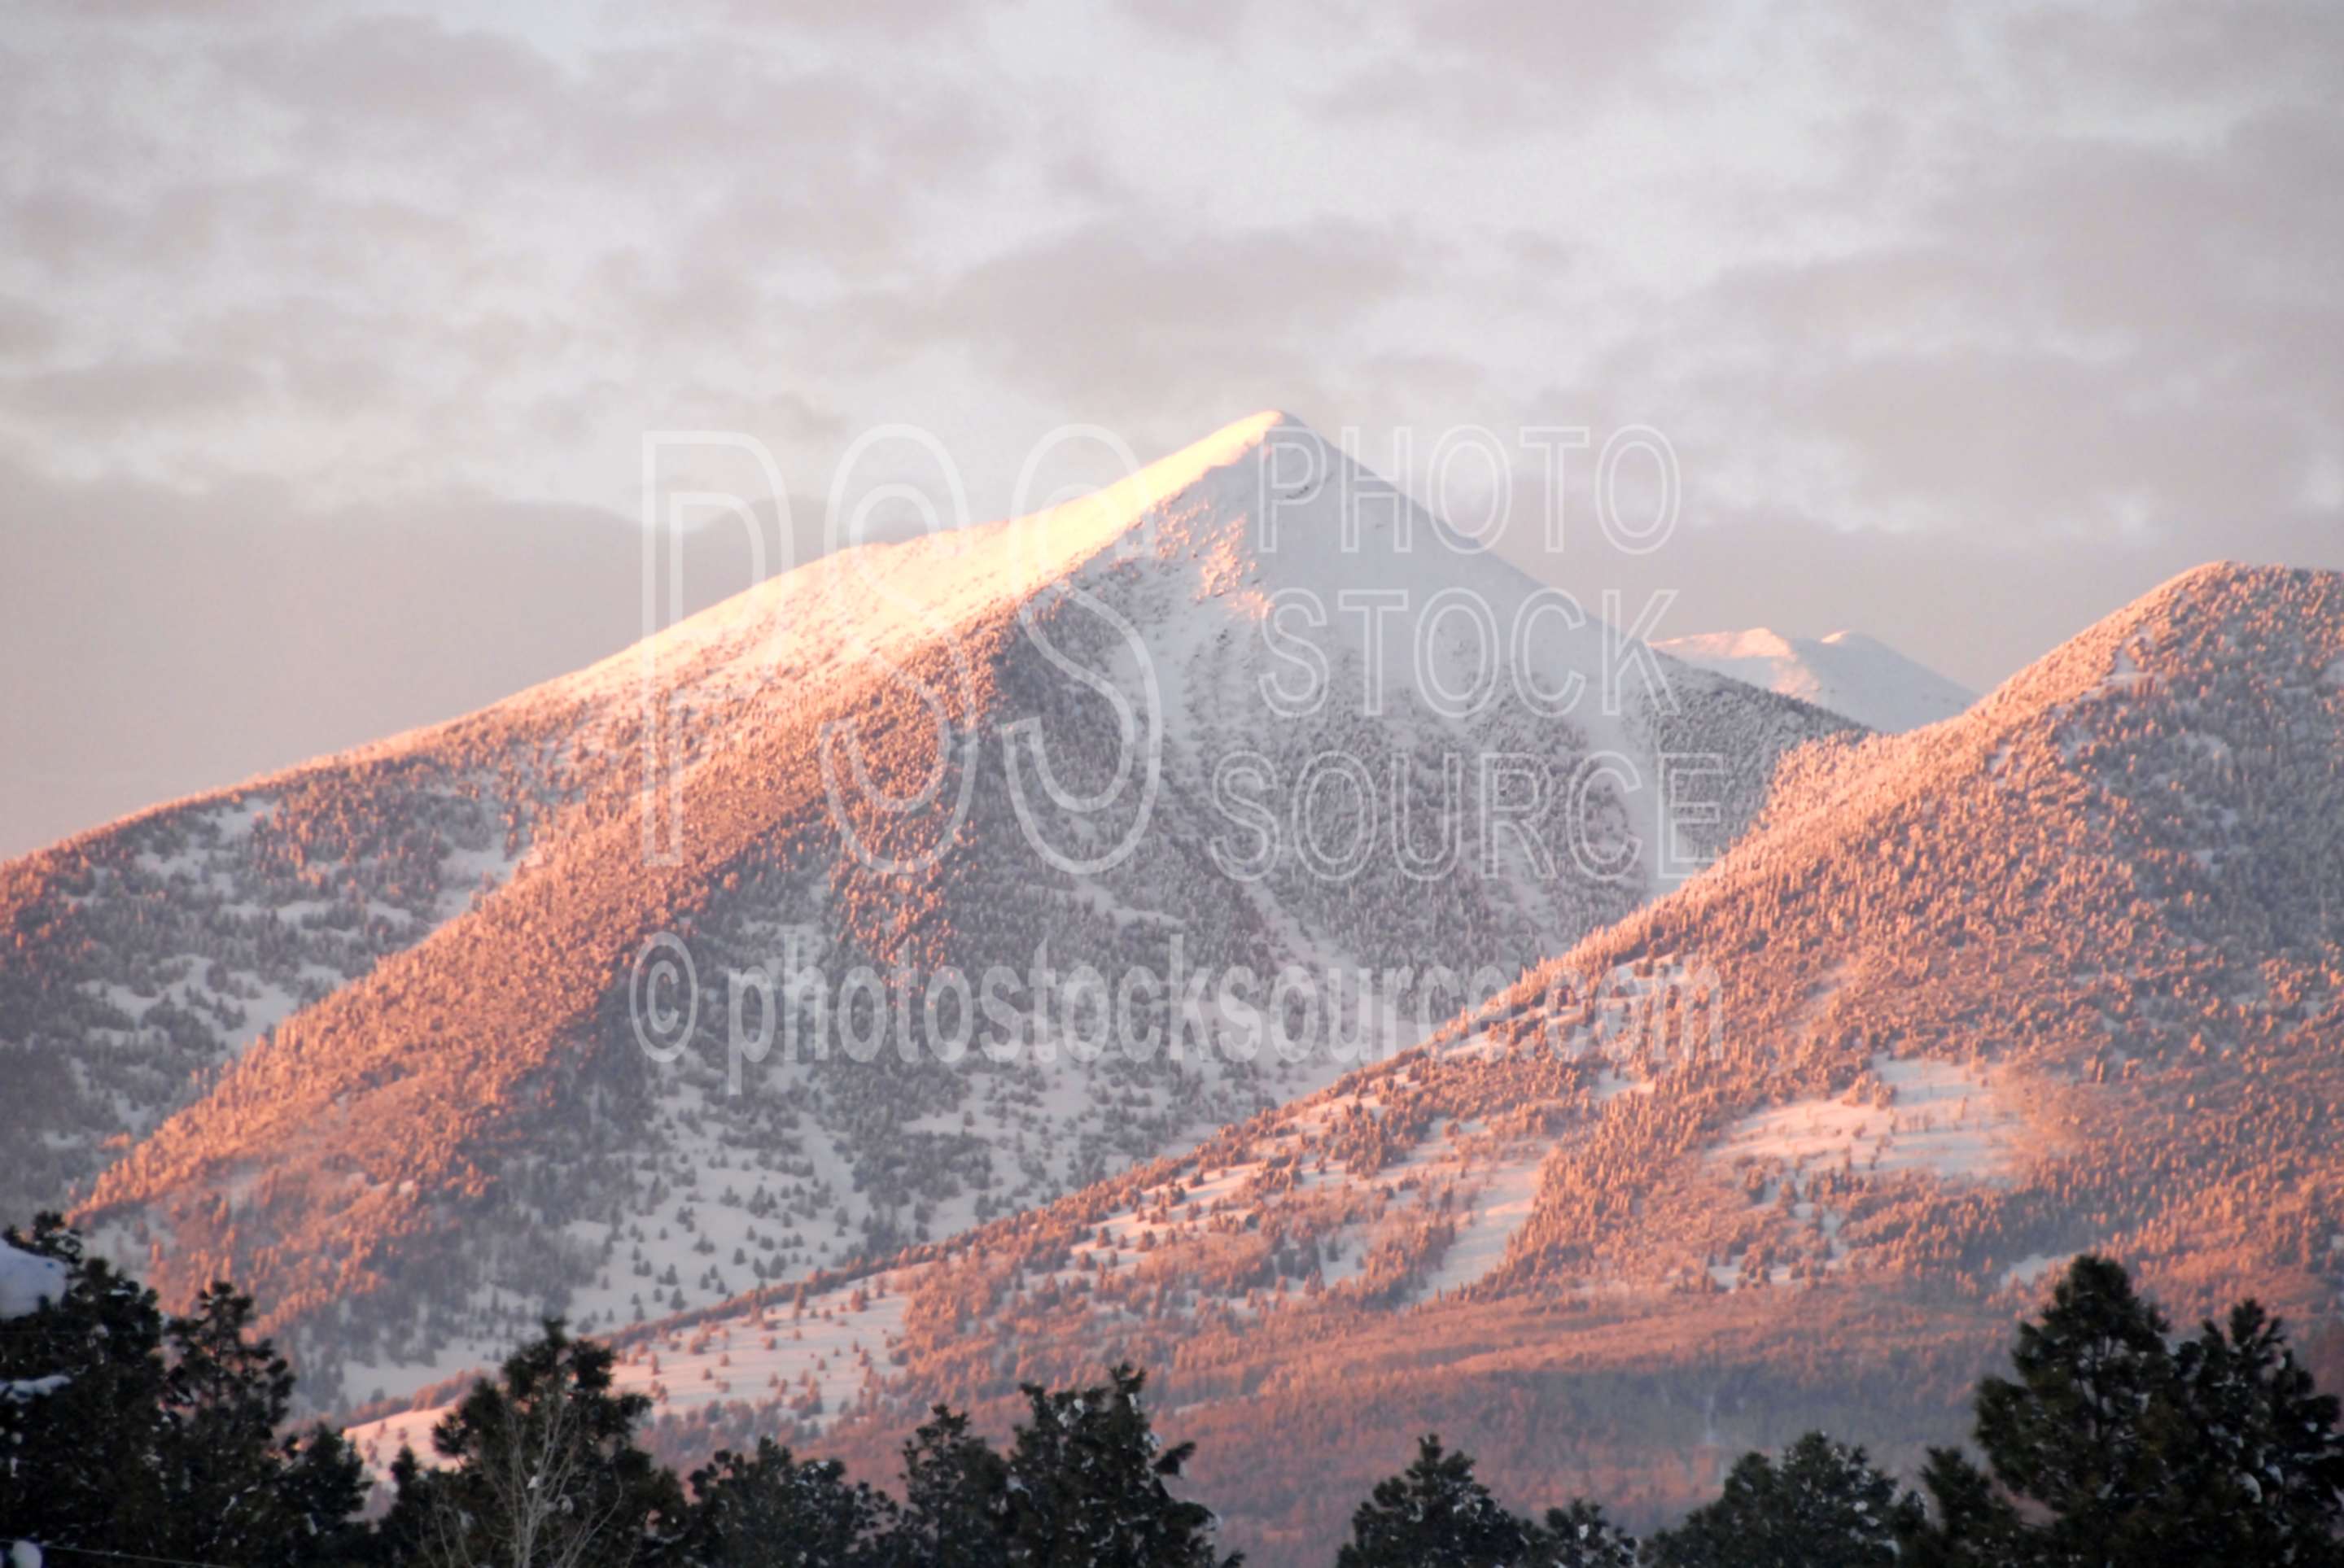 Snow on The Peaks,san francisco peaks,the peaks,volcano,mountain,sunset,cold,winter,nature